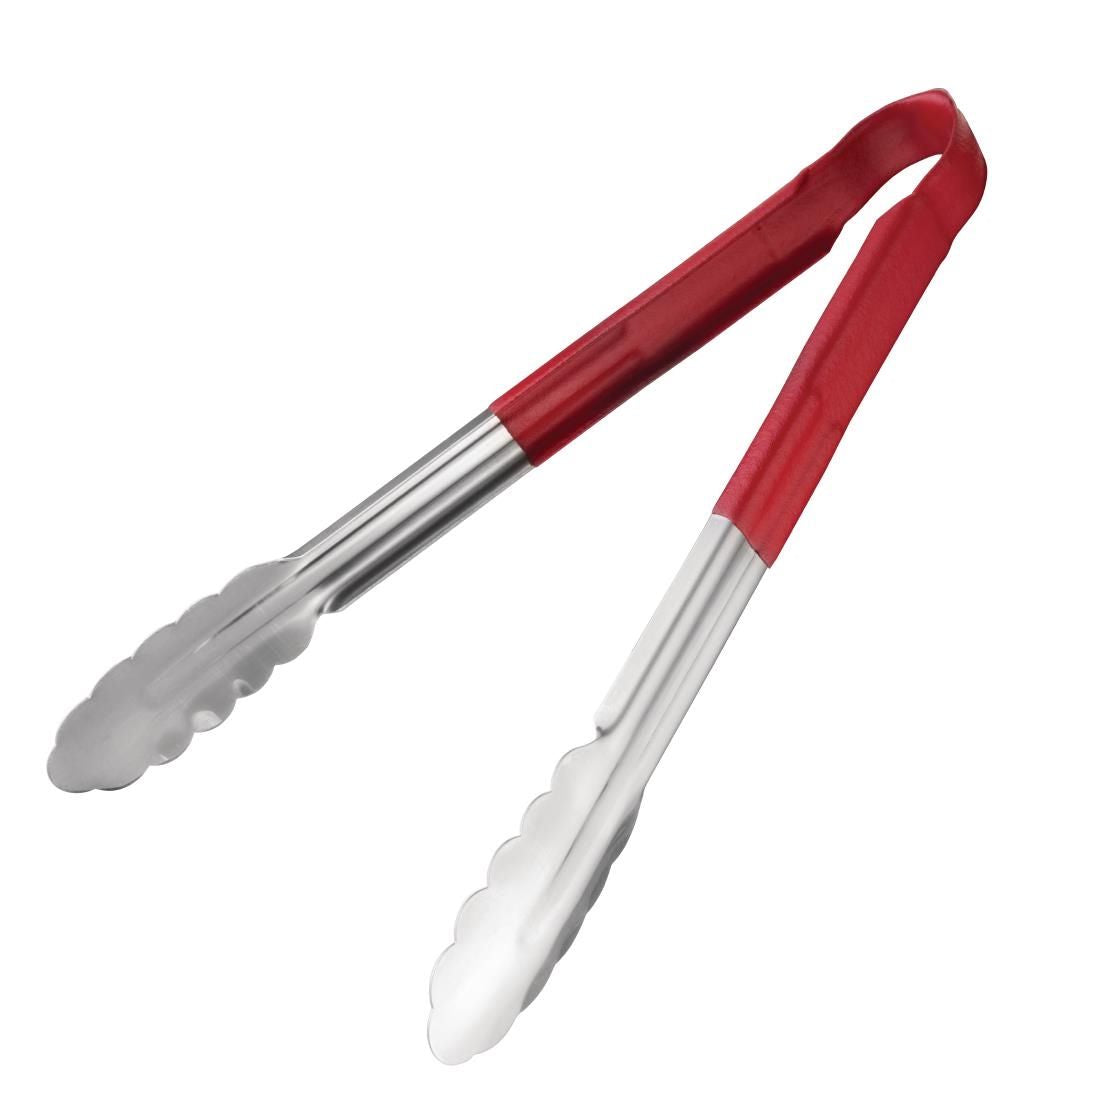 Vogue Colour Coded Red Serving Tongs 11"